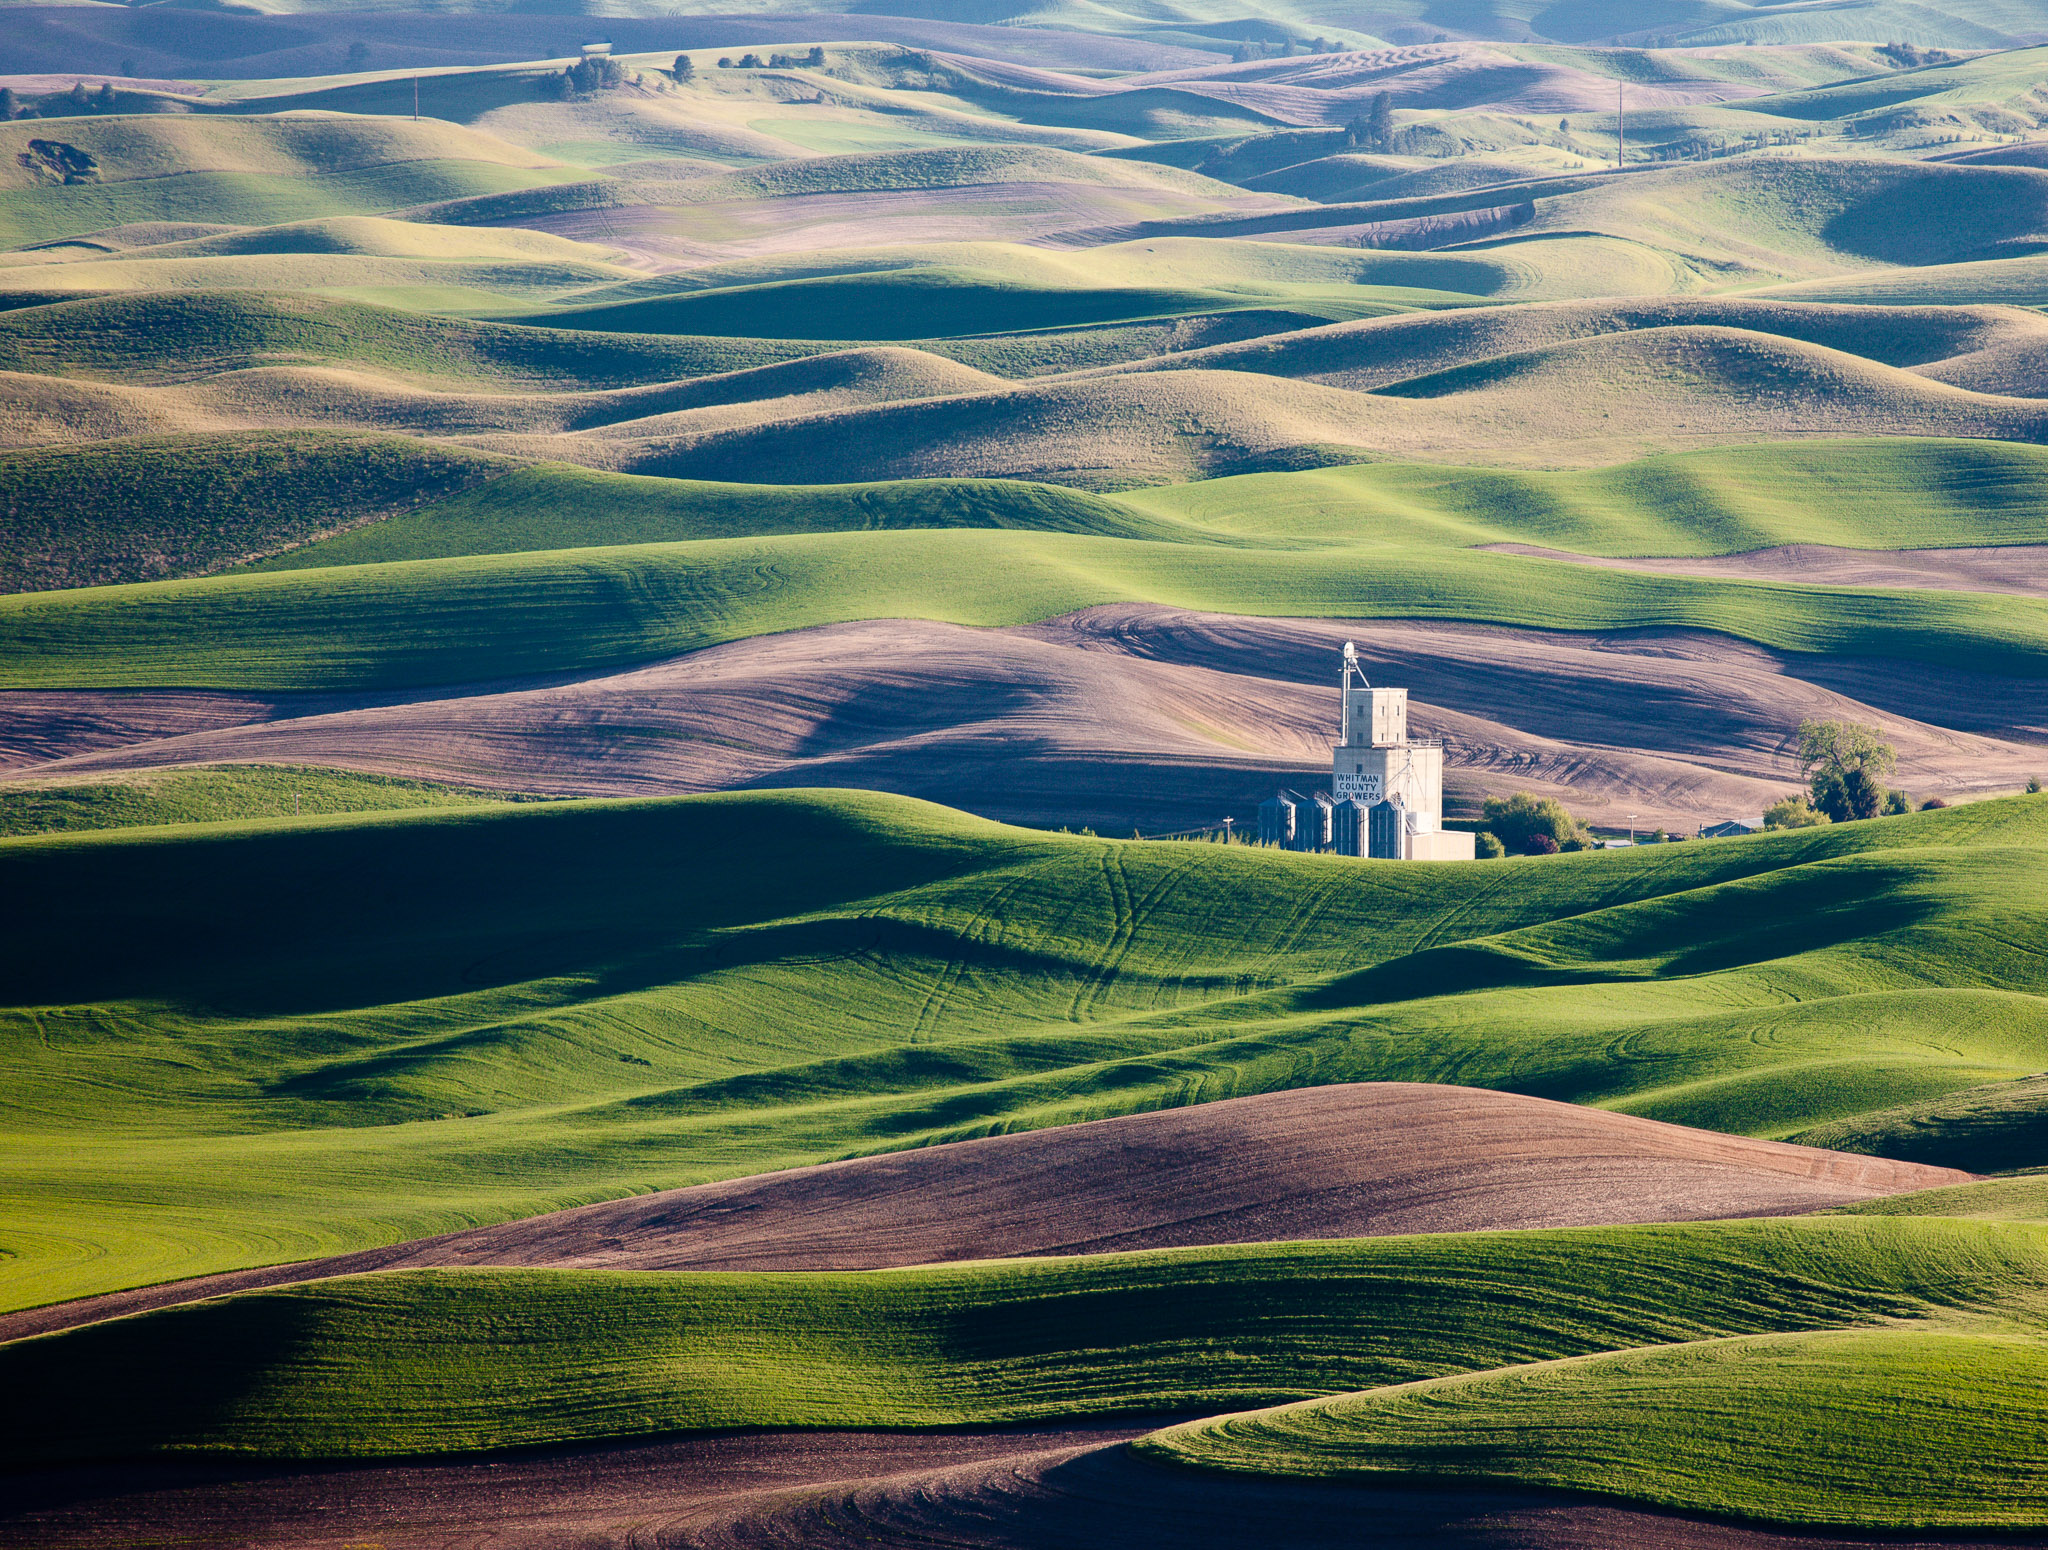 Late light from Steptoe Butte, The Palouse